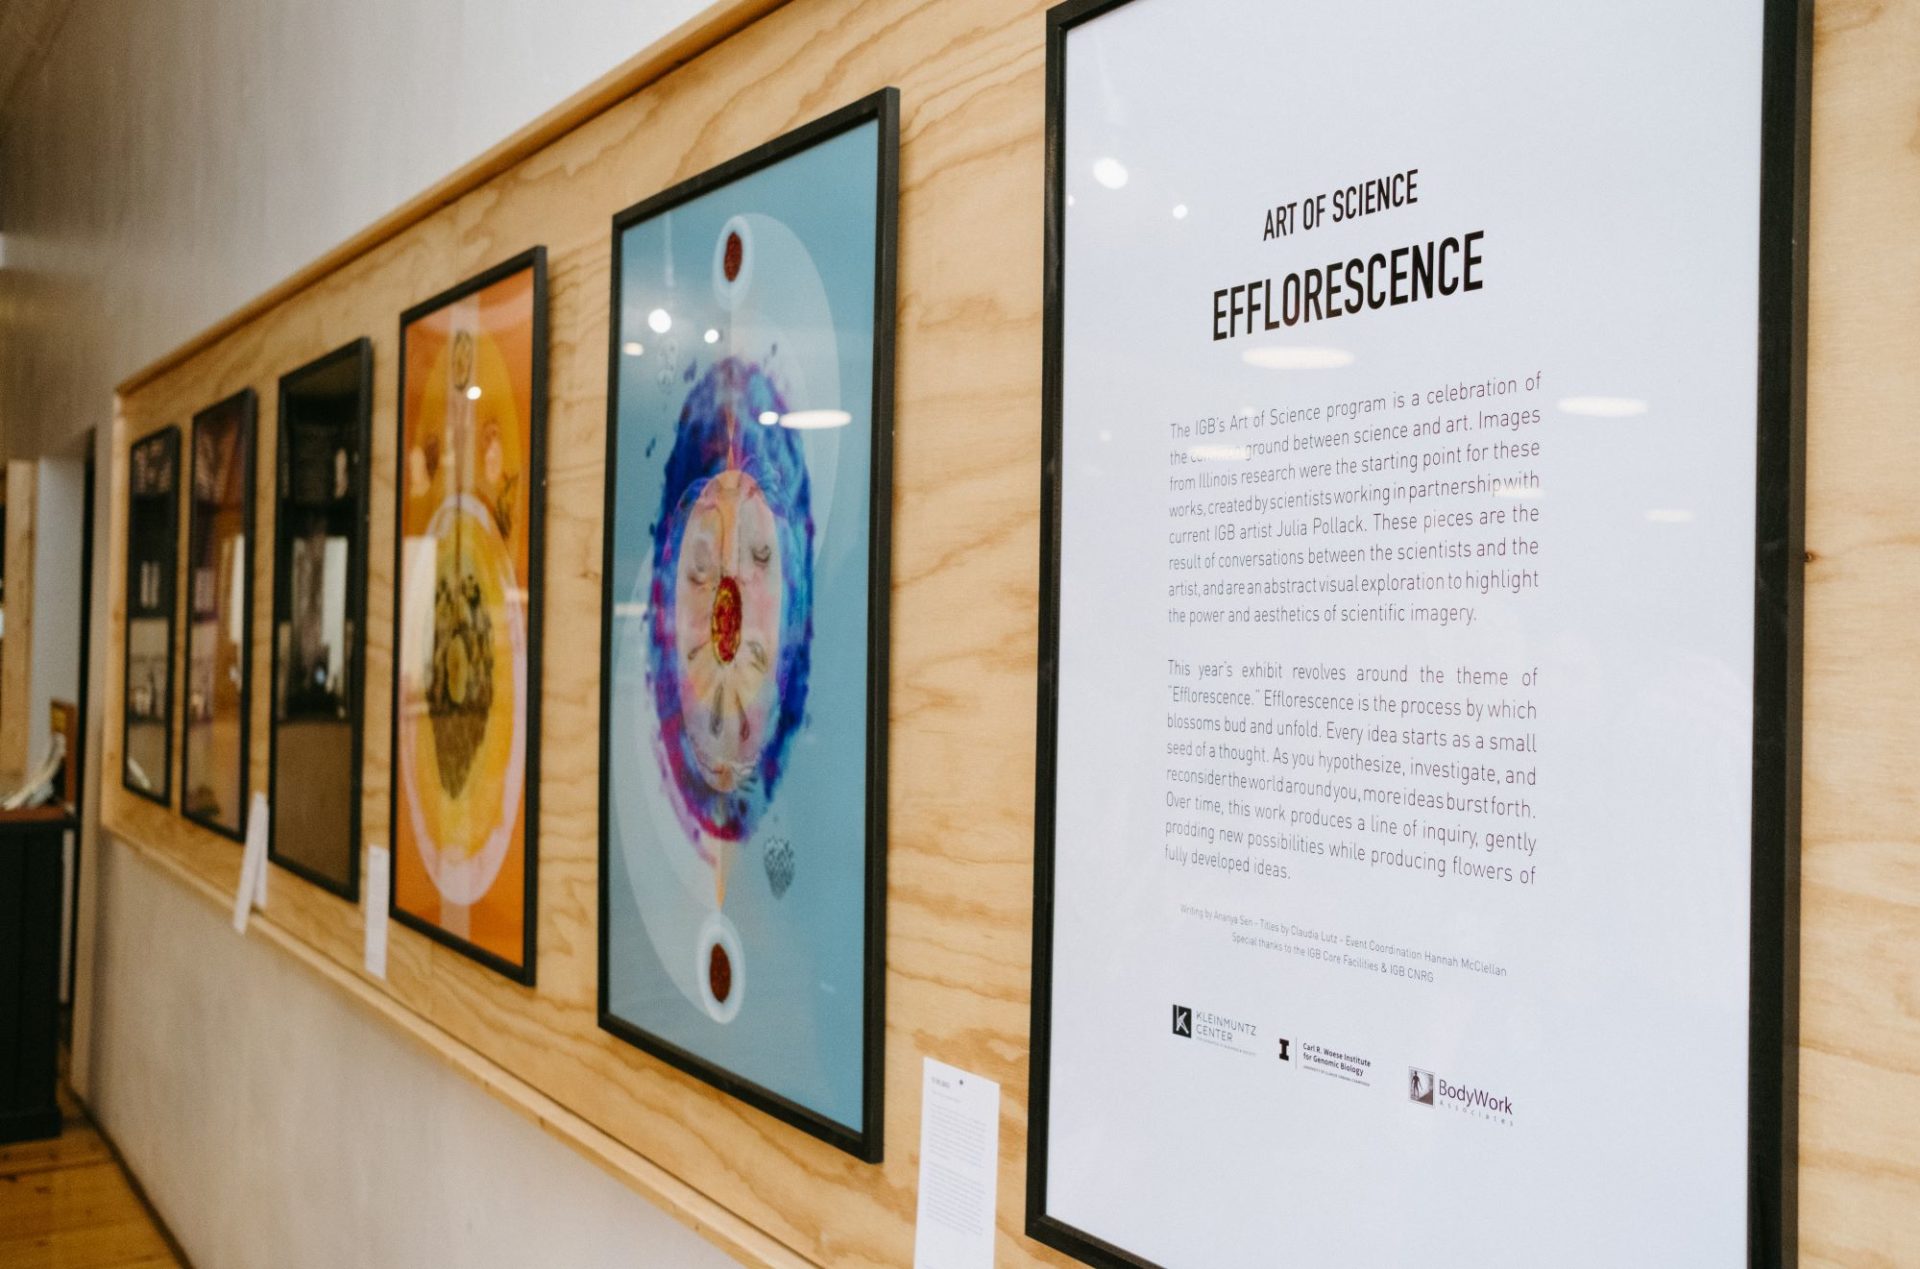 A row of brightly colored framed images hang on a wooden backdrop on a white wall. In the foreground is a framed description of the display with a white background and black type. It says The Art of Science: Efflorescence at the top.